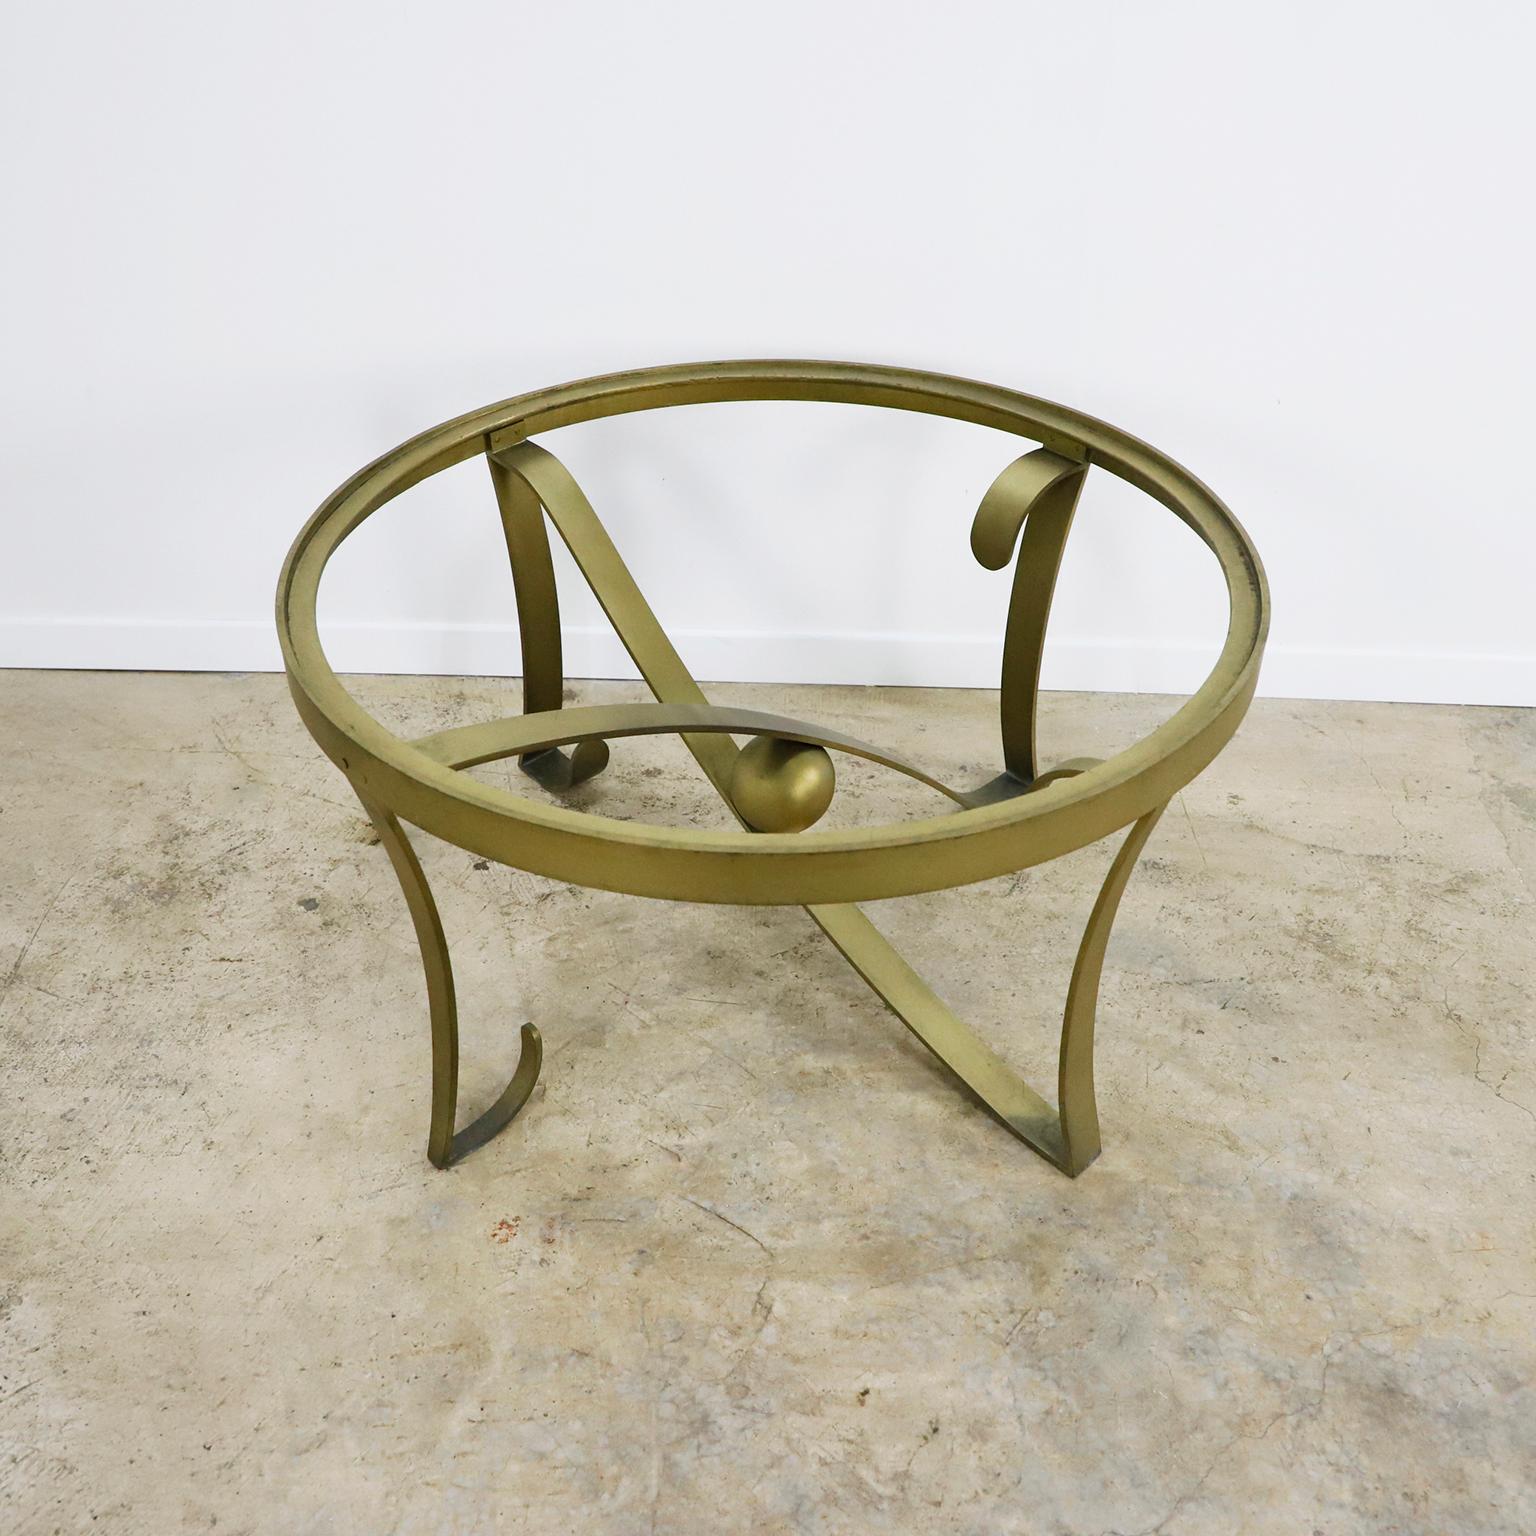 Made in Mexico, circa 1950s, designed by Arturo Pani. We offer this fantastic side table in original conditions.